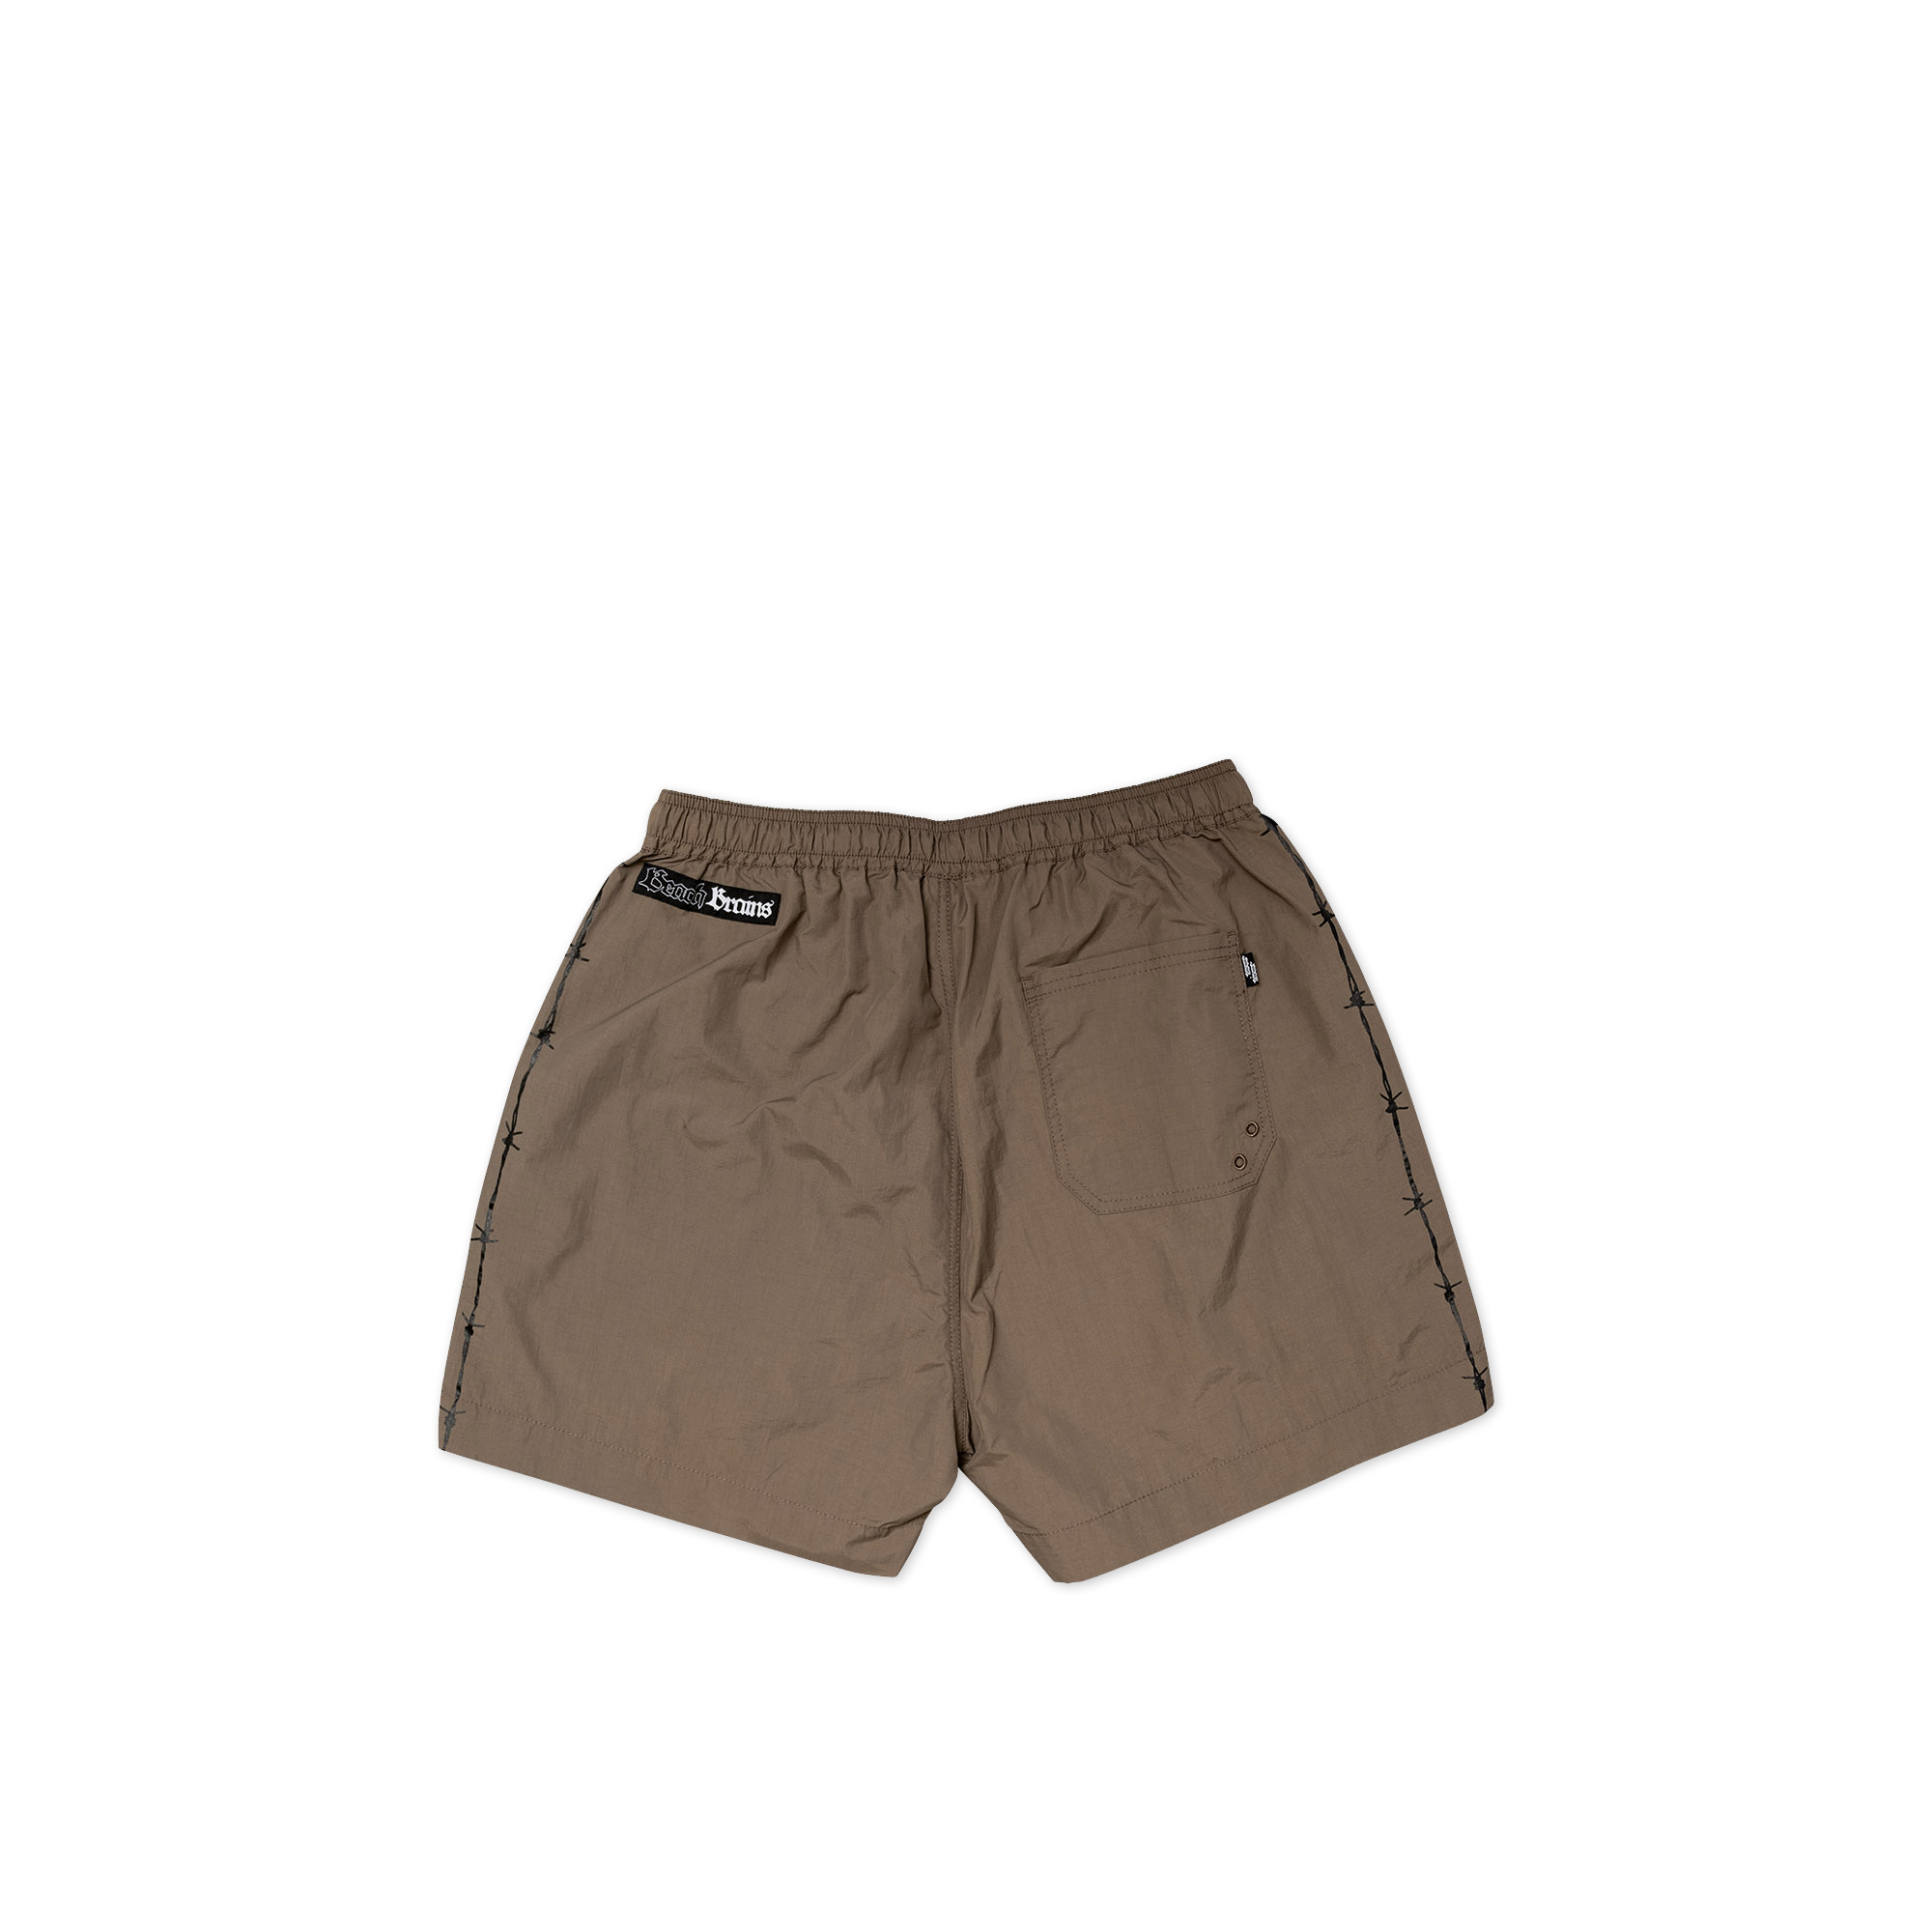 BARB WIRE BOARDSHORT - FAWN